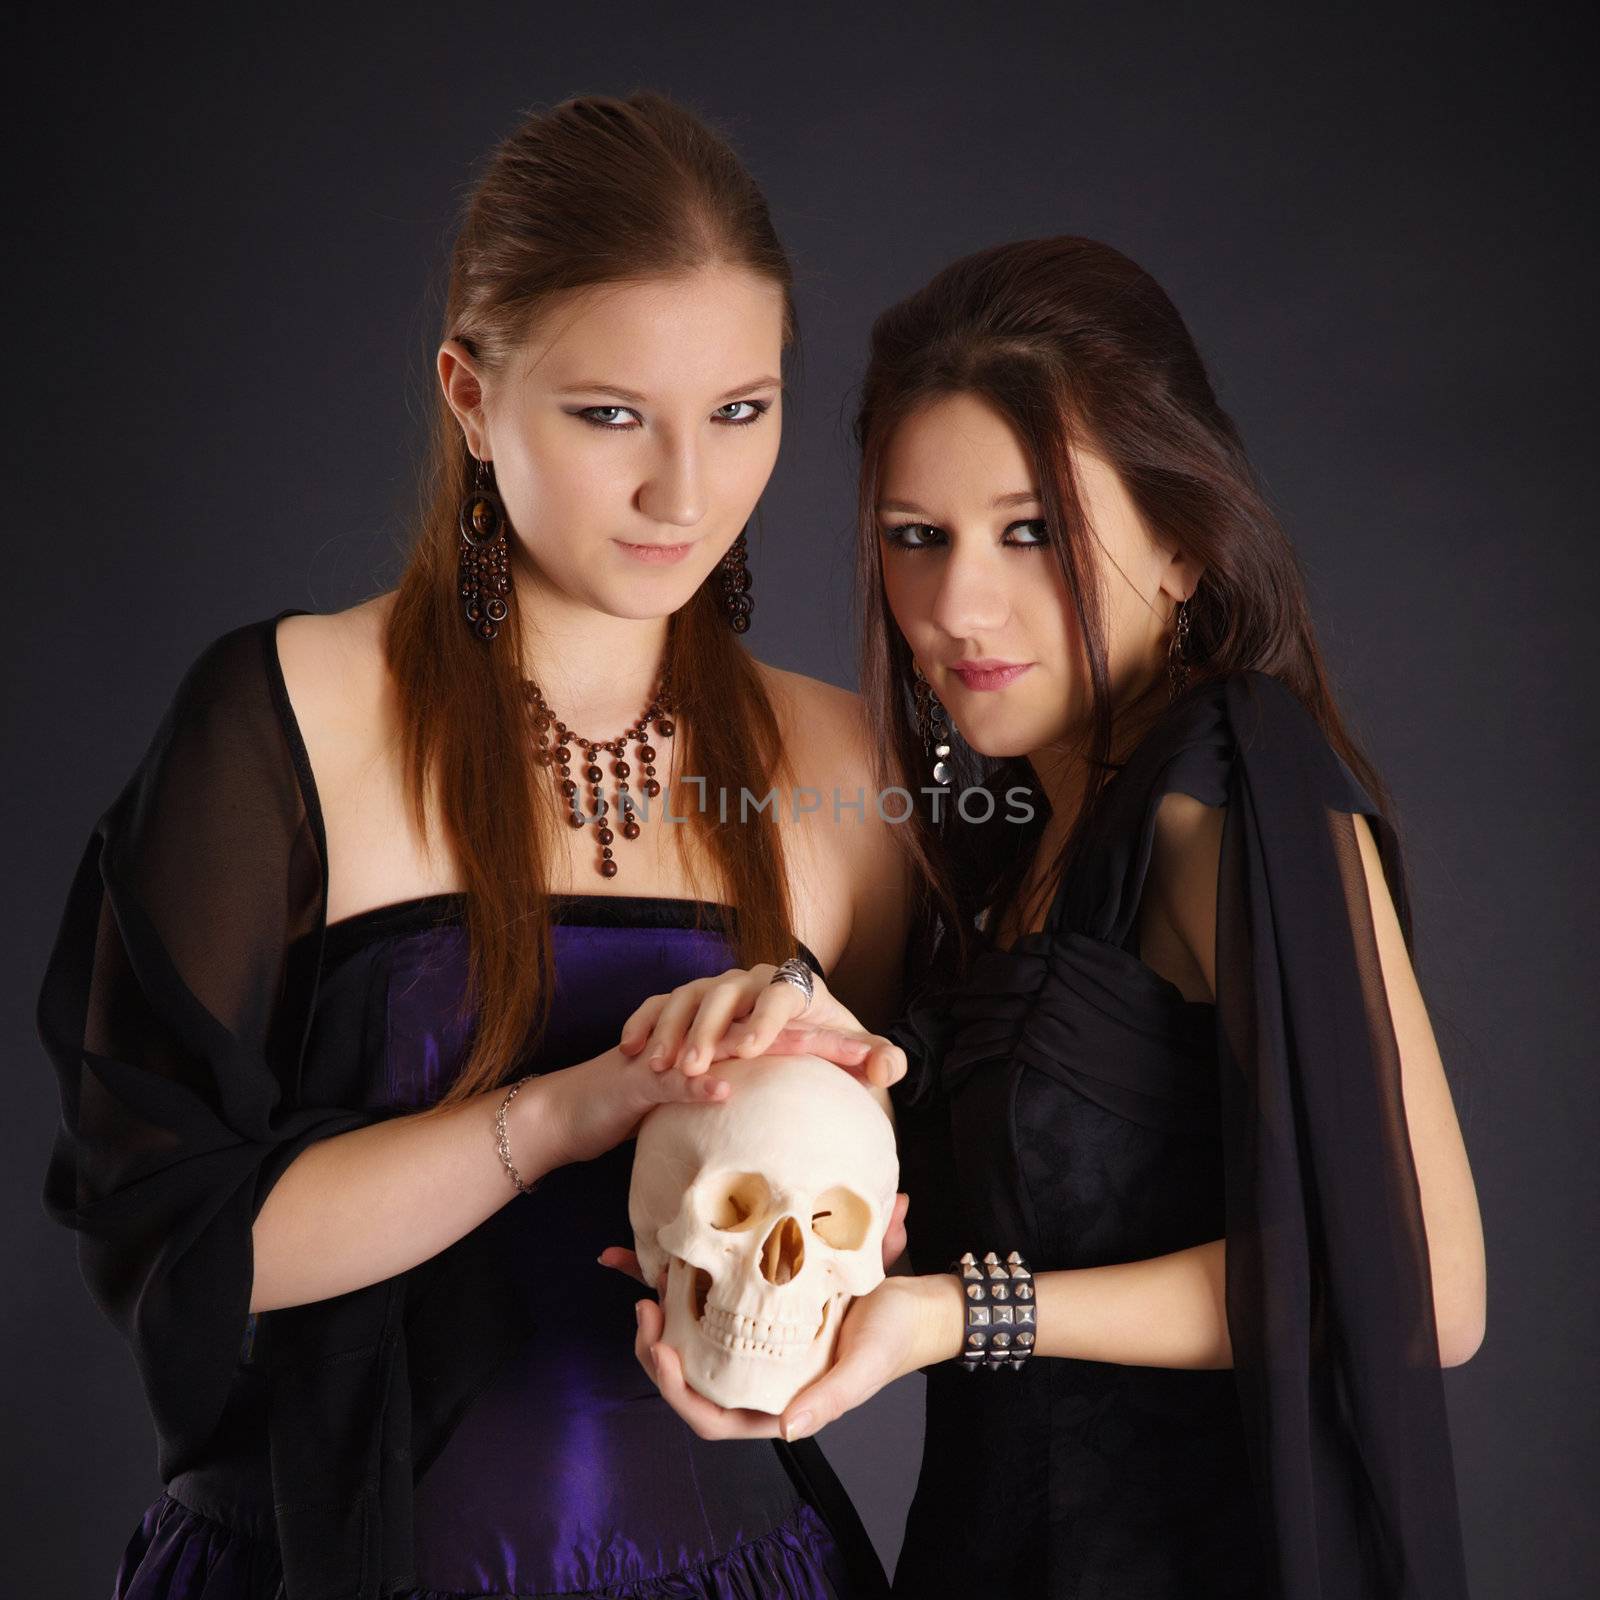 Two young girls in the dark with a human skull